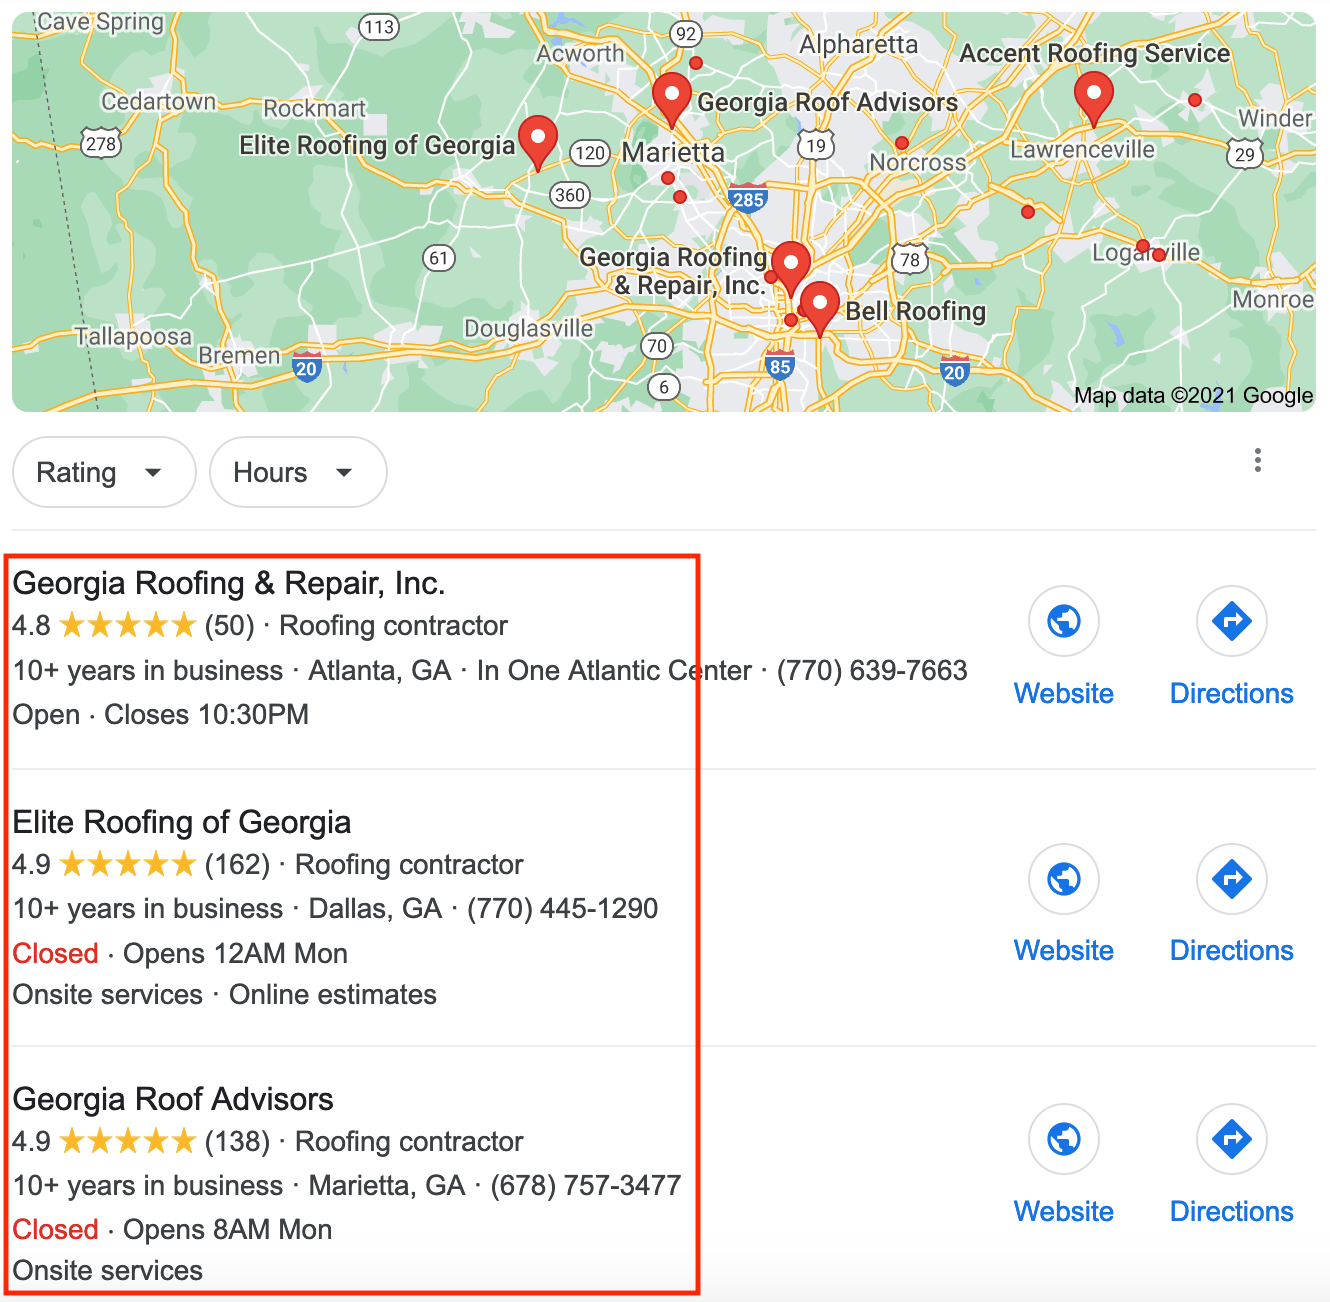 A screenshot of a Google map ranking of roofing businesses in Georgia.